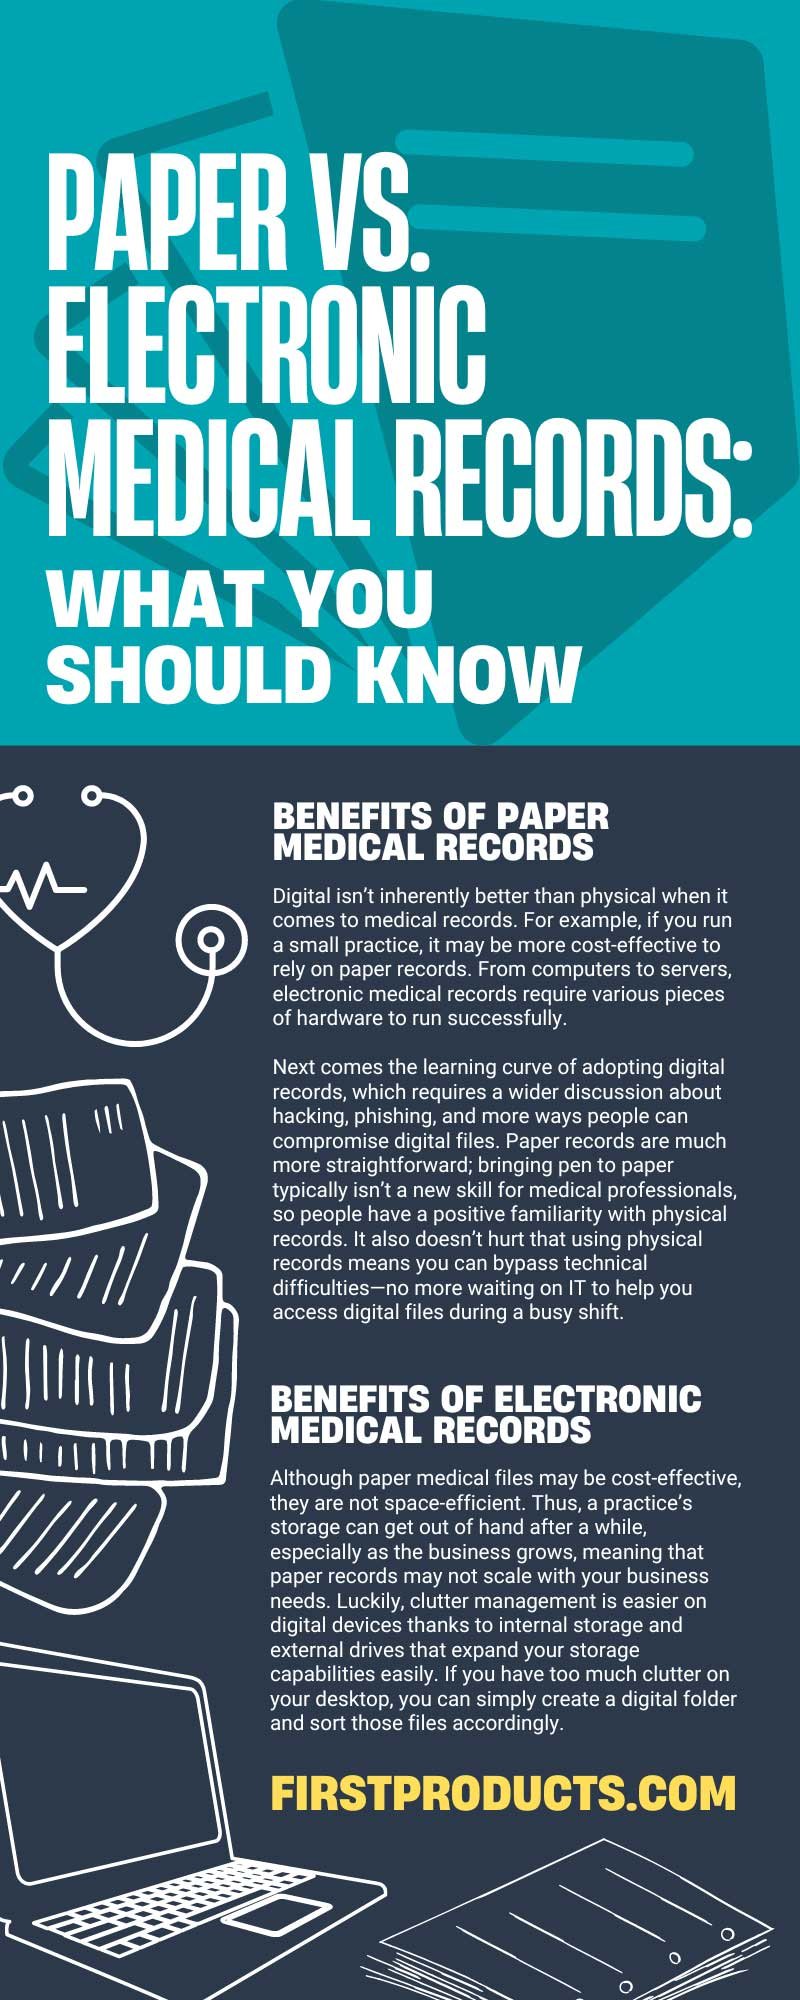 Paper vs. Electronic Medical Records: What You Should Know